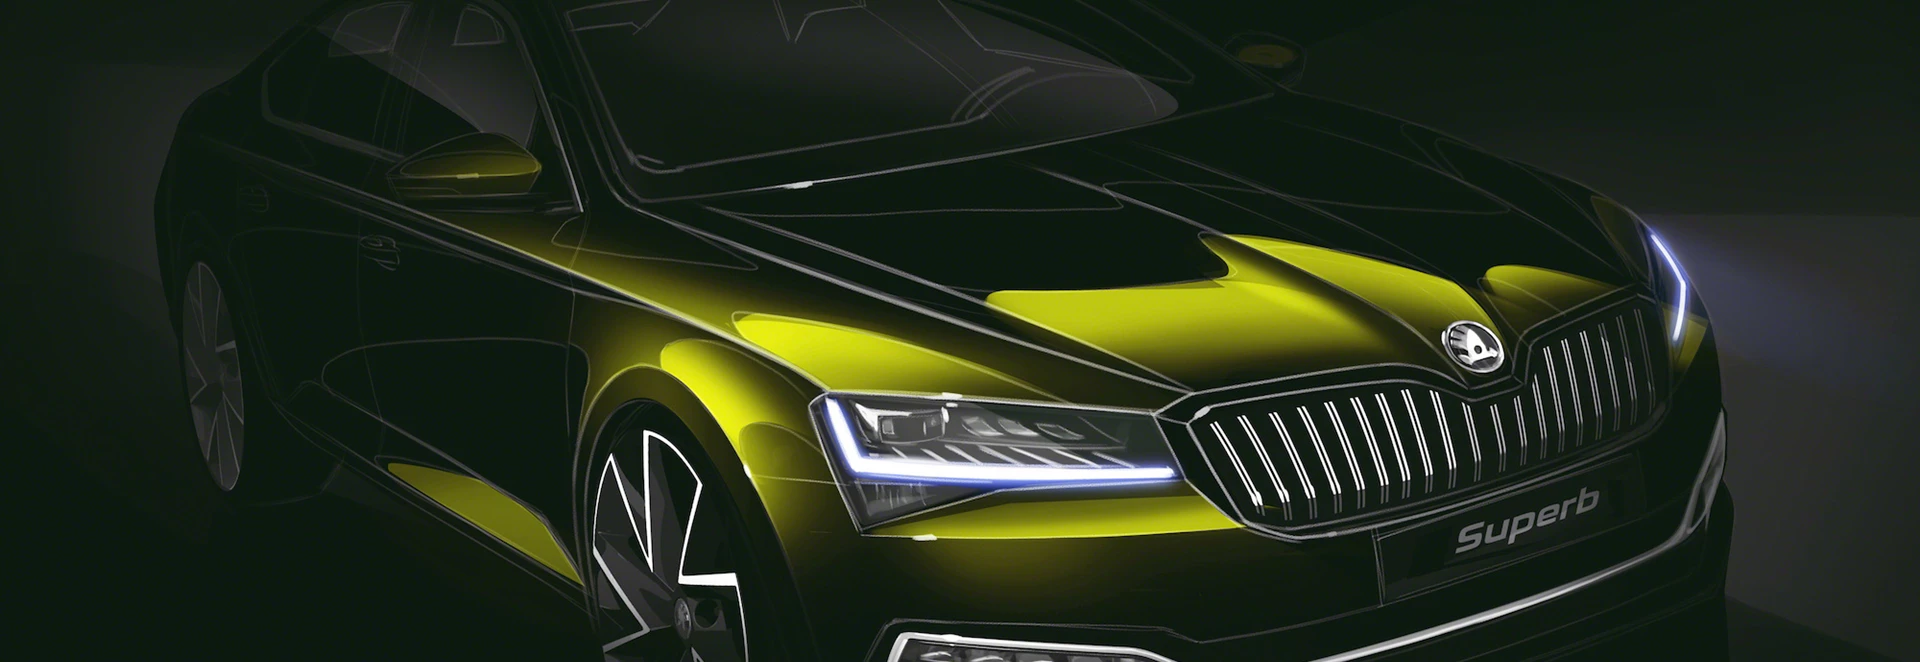 Facelifted Superb set to be the first Skoda to feature Matrix LED lighting